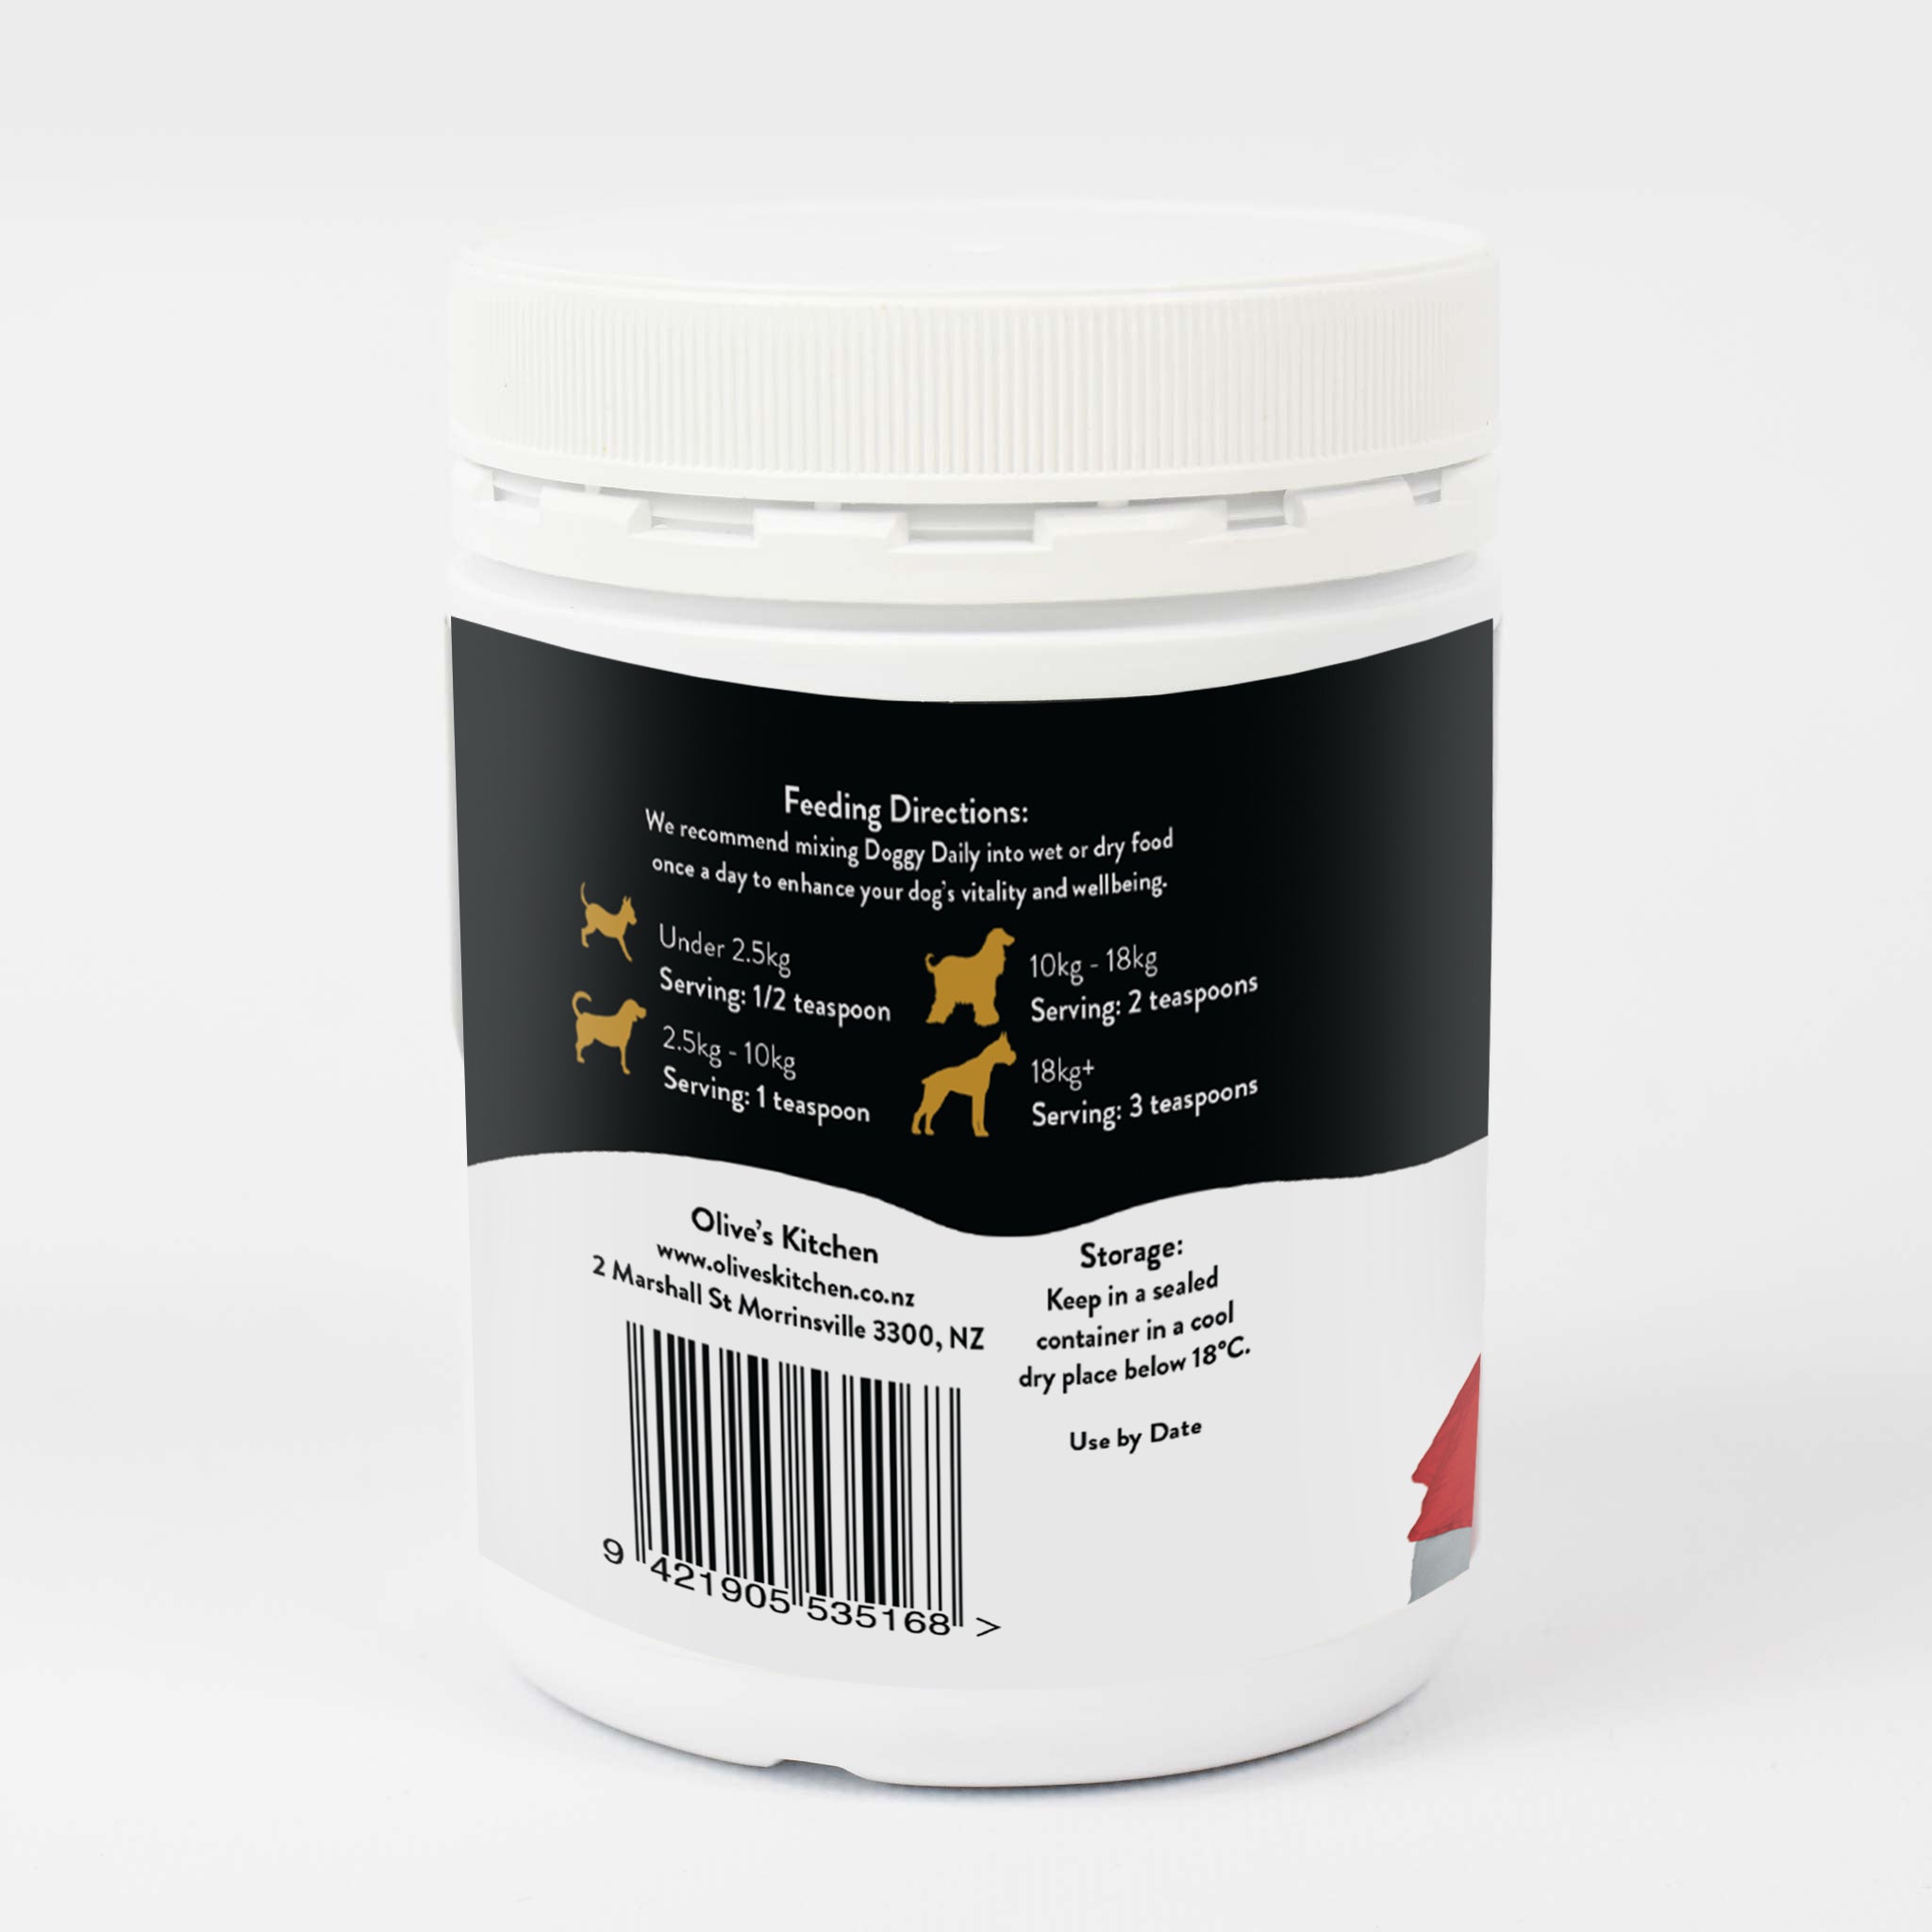 Doggy Daily Immunity Boost Supplement - 250g